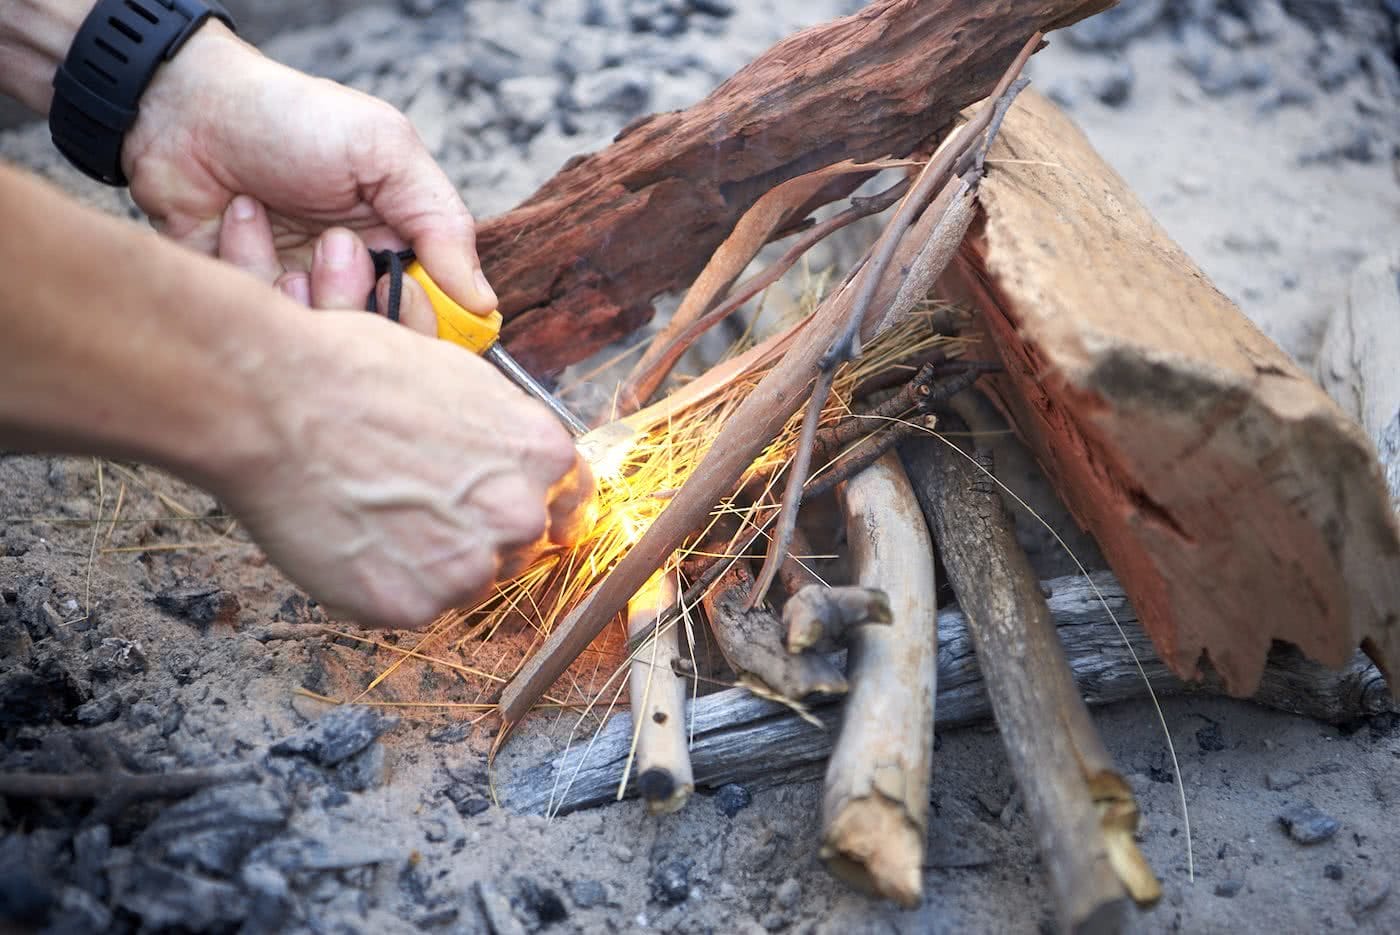 How To Make An Awesome Campfire Without Matches, photo by Neil Massey, fire, wood, sticks, fire pit, hands